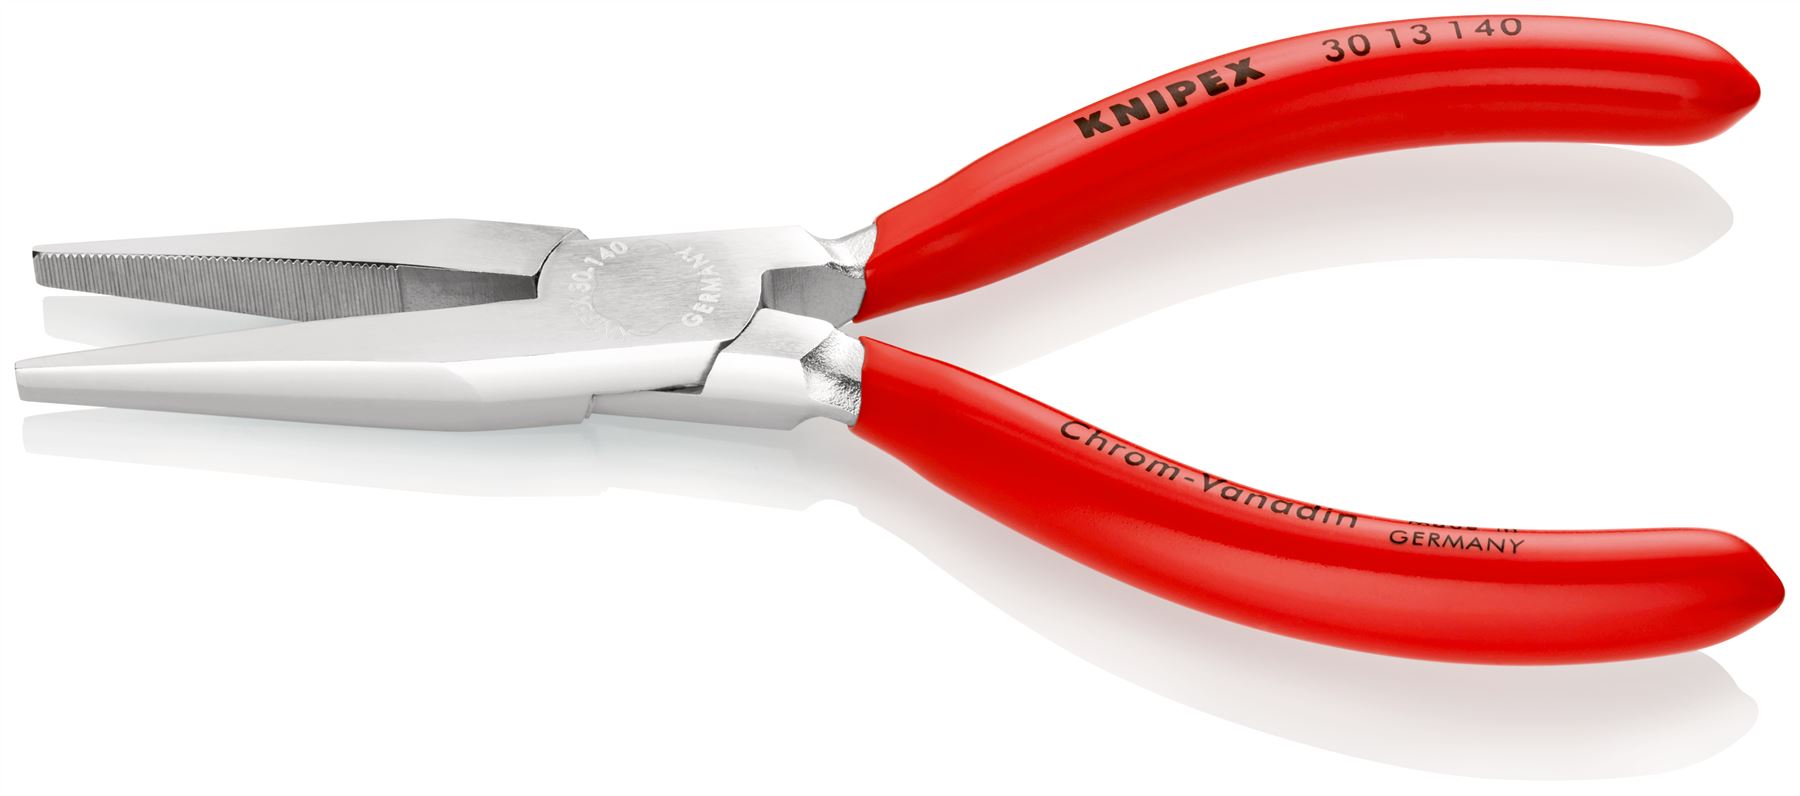 KNIPEX Long Nose Pliers Heavy Duty Wear Resisting 140mm Chrome Plastic Coated 30 13 140